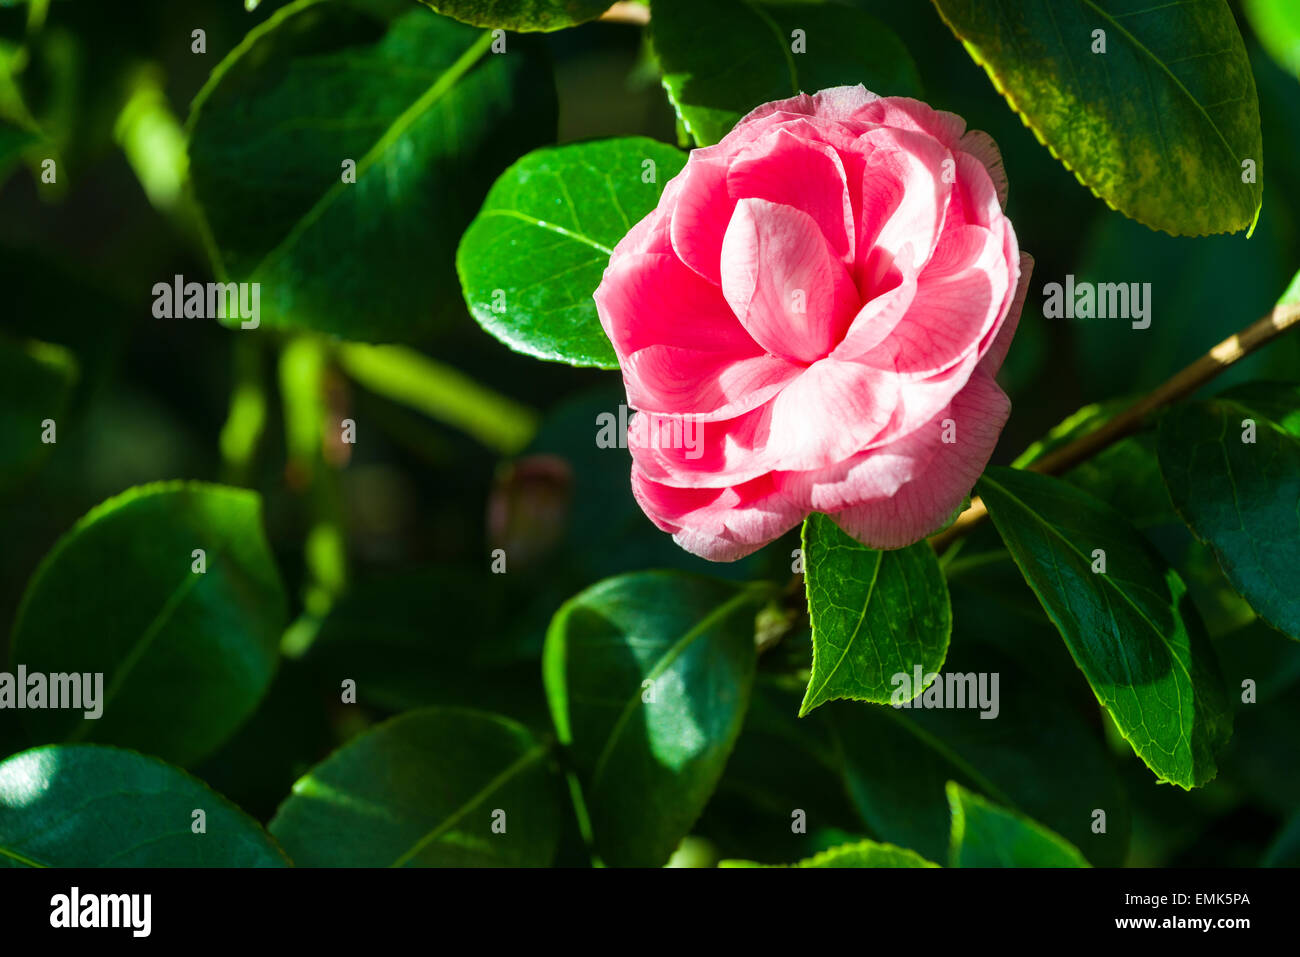 Japanese camellia (Camellia japonica) blooming, red blossom Stock Photo